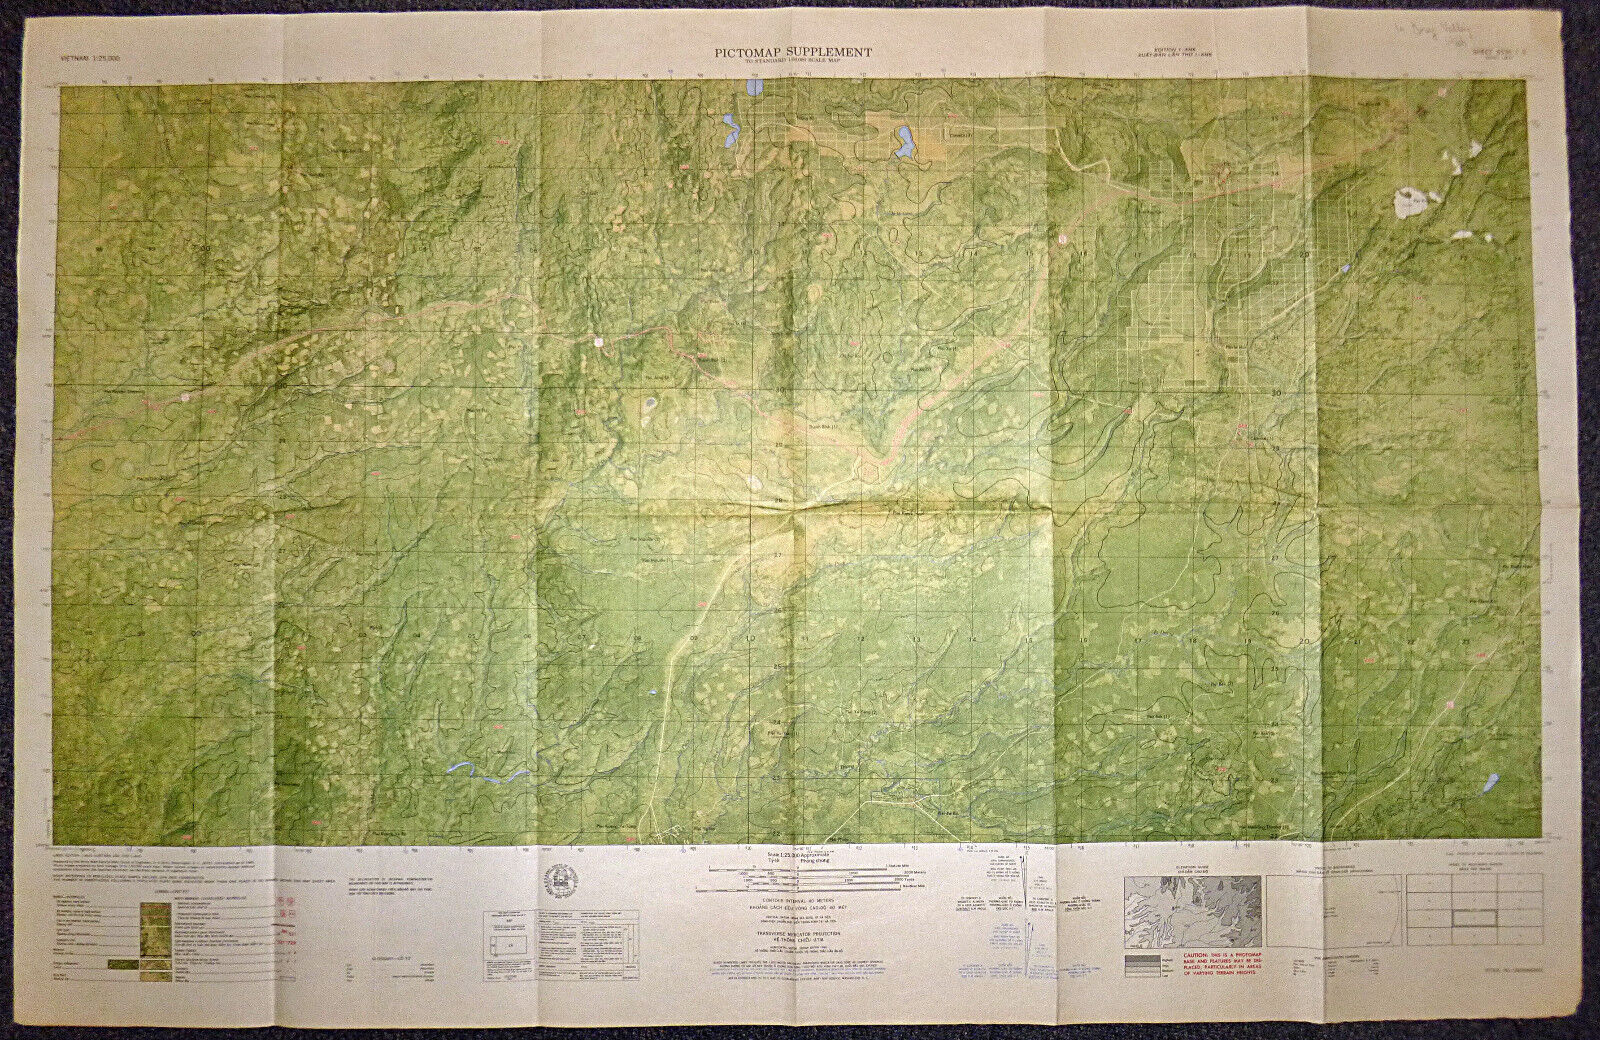 6536 i S - US Army - 1966 MAP - Ia Drang Valley - Hwy 19 - Vietnam War - Ia Mur